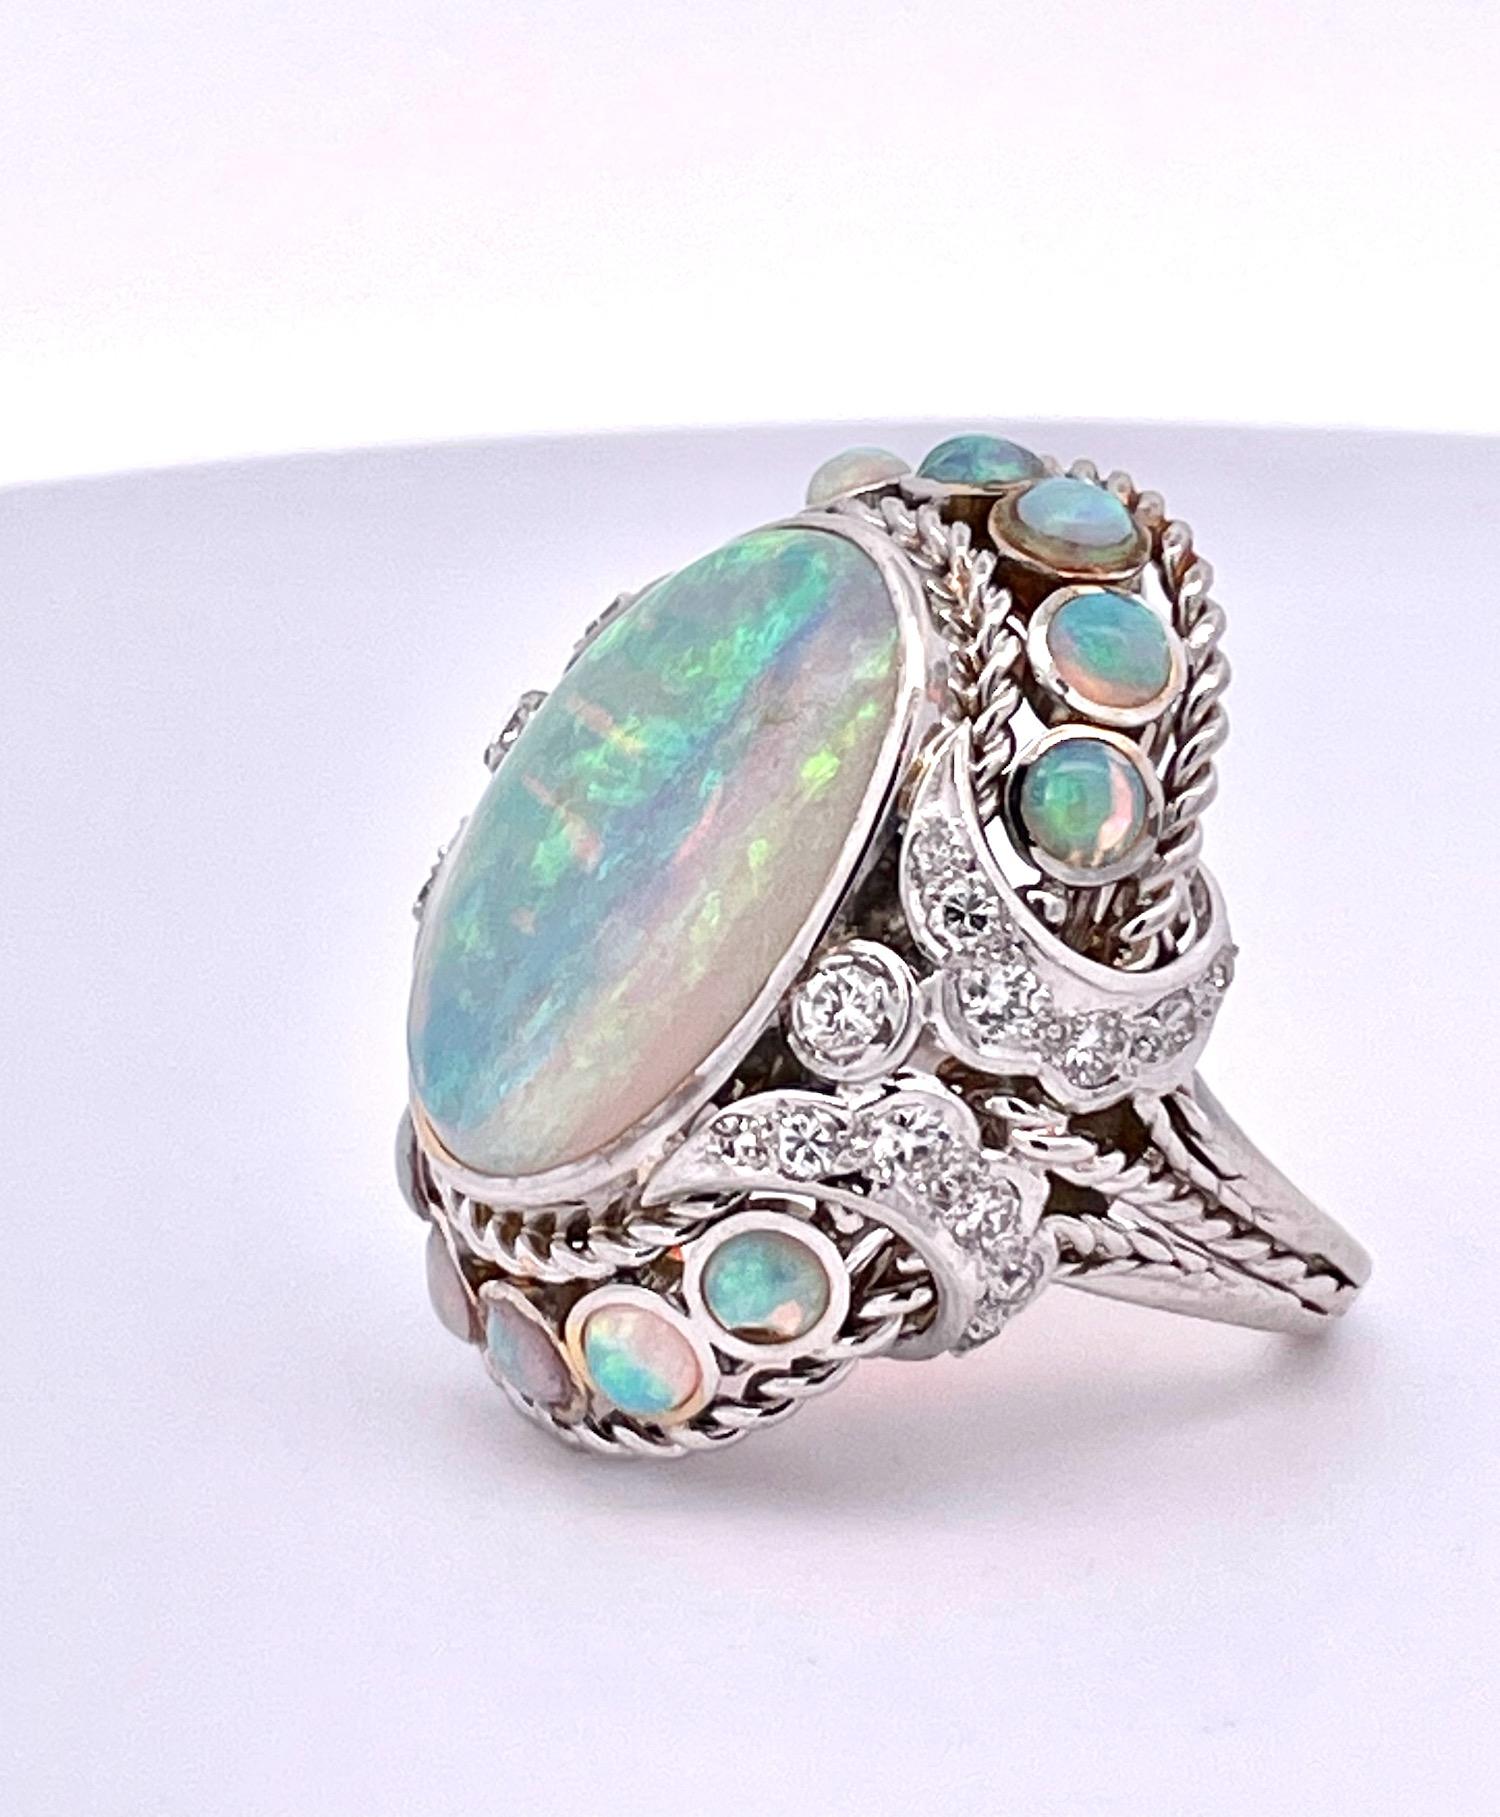 This Opal Ring is huge it measures 35mm x 30mm and has beautiful matrix of Blue, Pink, and Yellow.  This cocktail ring has an Opal of 19.82 x 14.82 x 12.90 deep and weighs in at 20.19 grams. It also has 12 smaller Opals of the same color around the